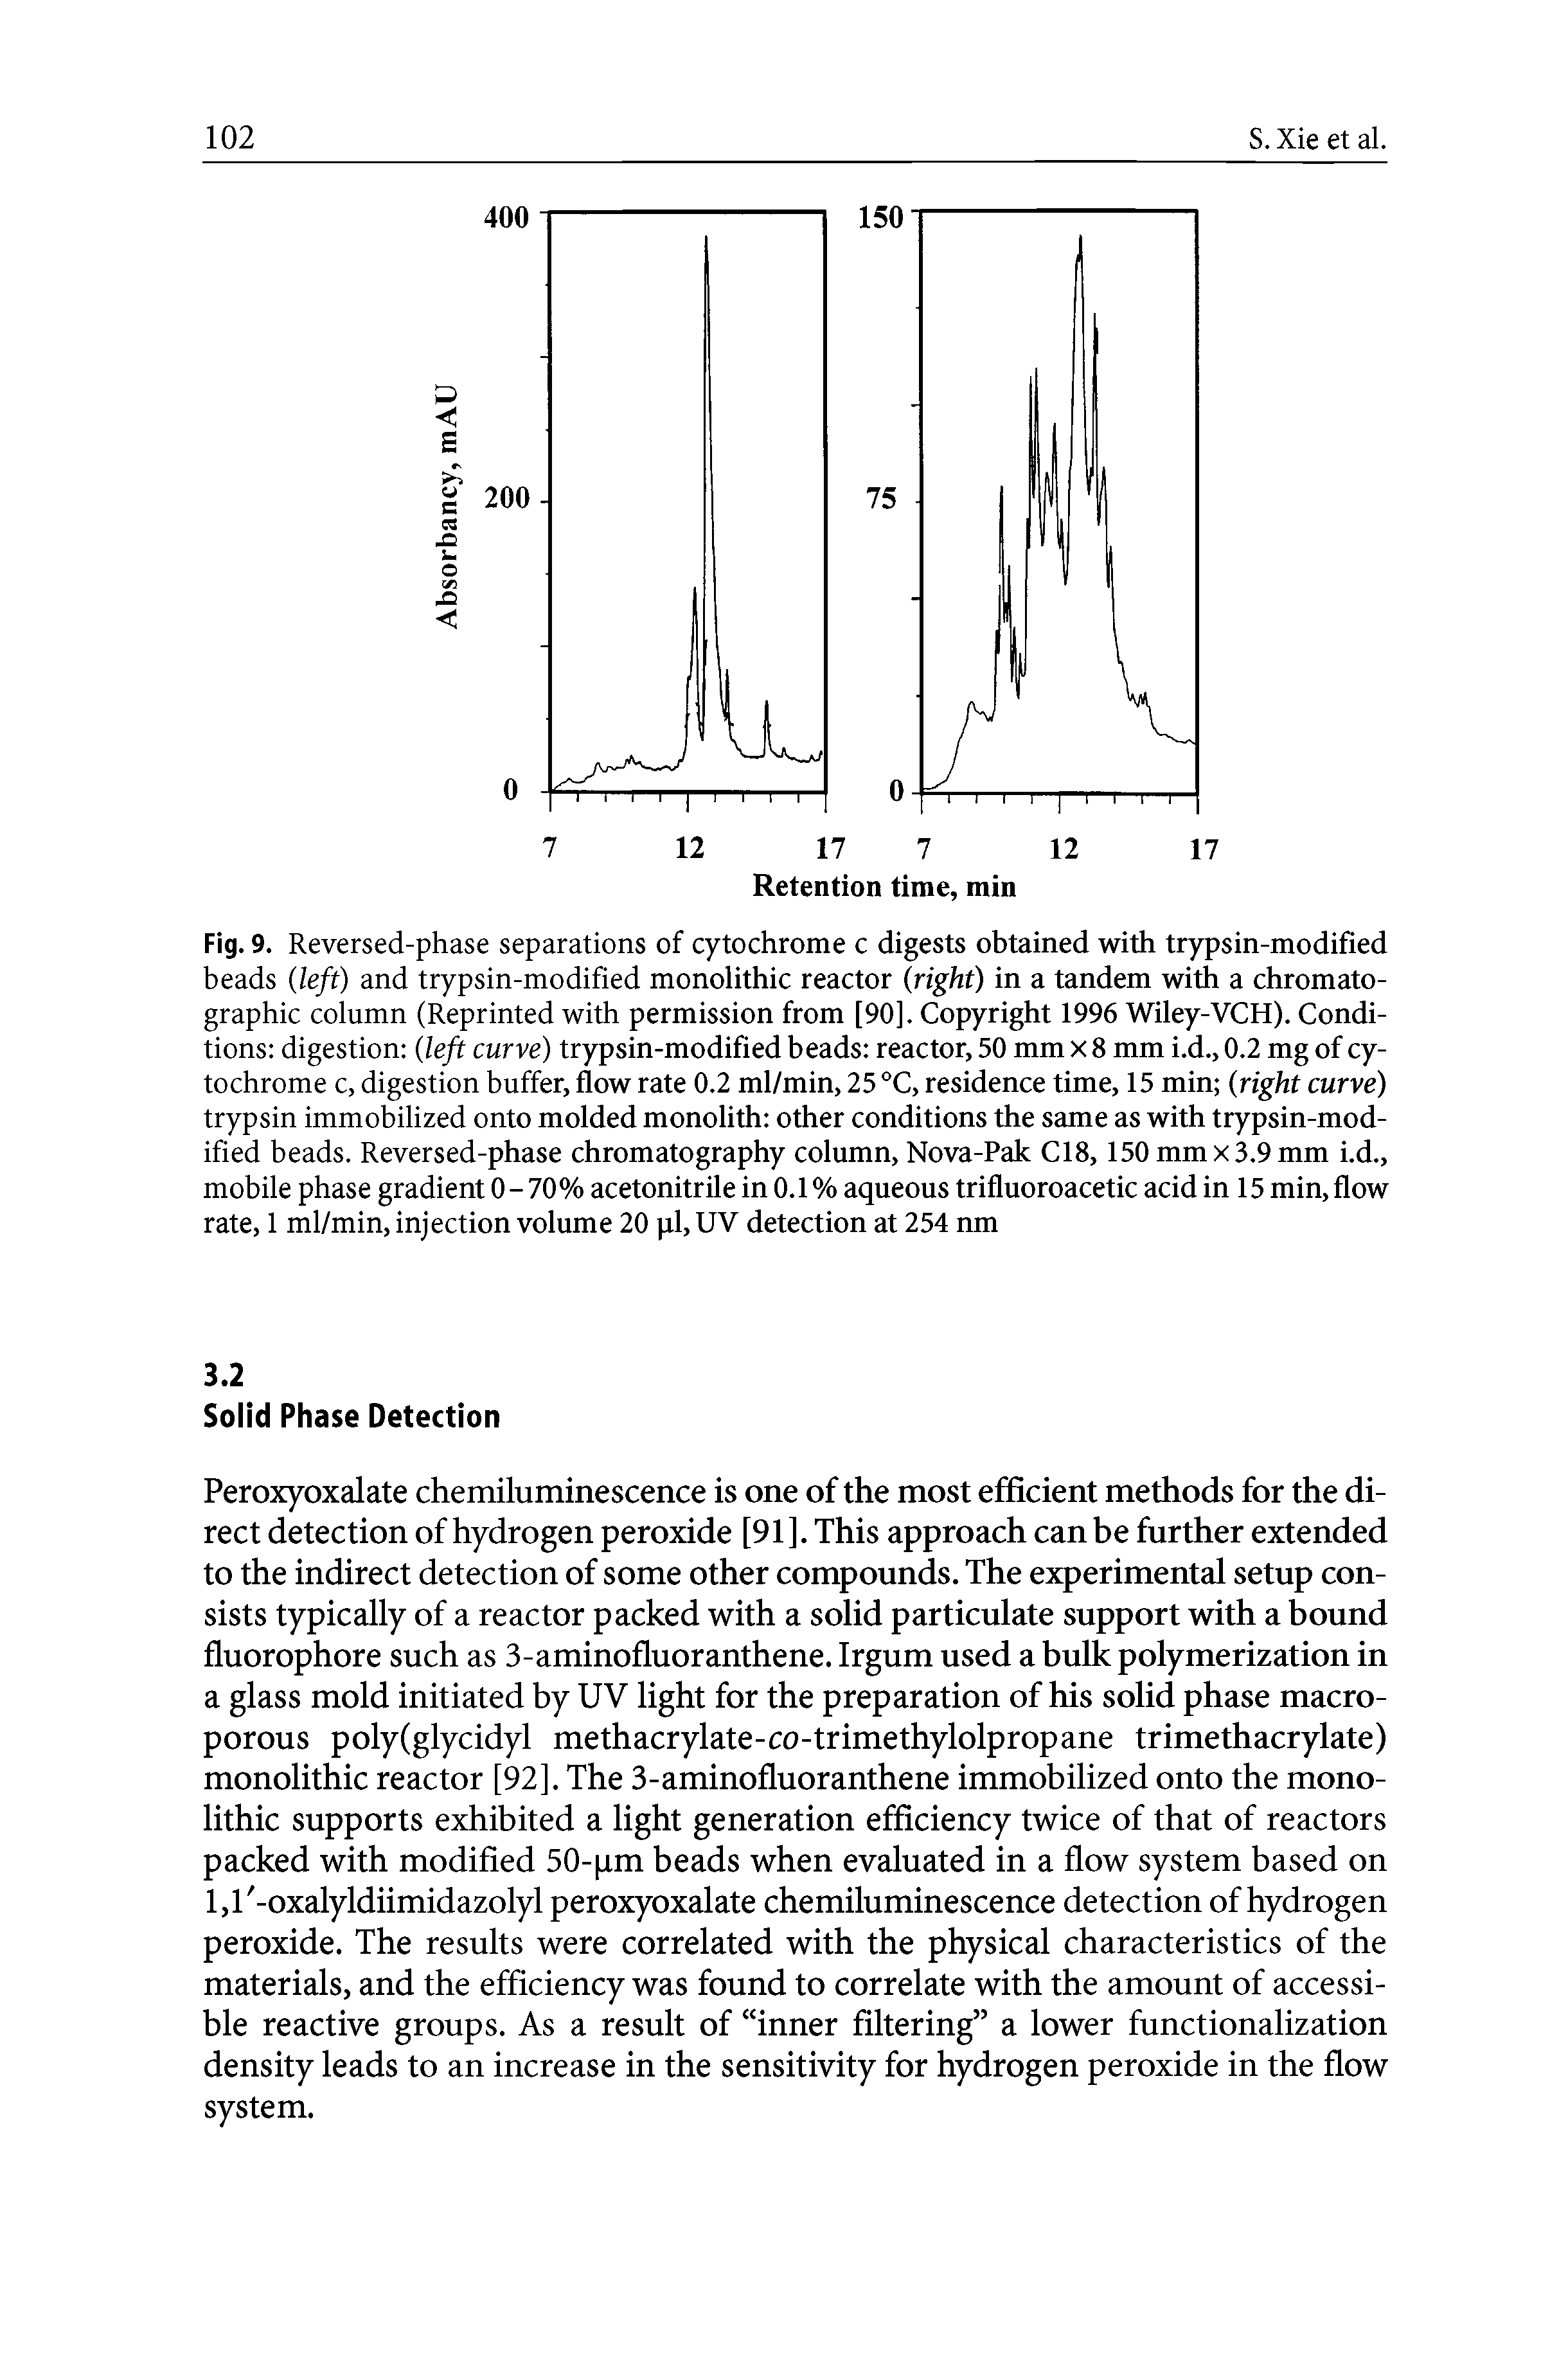 Fig. 9. Reversed-phase separations of cytochrome c digests obtained with trypsin-modified beads (left) and trypsin-modified monolithic reactor (right) in a tandem with a chromatographic column (Reprinted with permission from [90]. Copyright 1996 Wiley-VCH). Conditions digestion (left curve) trypsin-modified beads reactor, 50 mm x 8 mm i.d., 0.2 mg of cytochrome c, digestion buffer, flow rate 0.2 ml/min, 25 °C, residence time, 15 min (right curve) trypsin immobilized onto molded monolith other conditions the same as with trypsin-modified beads. Reversed-phase chromatography column, Nova-Pak C18,150 mm x 3.9 mm i.d., mobile phase gradient 0-70% acetonitrile in 0.1% aqueous trifluoroacetic acid in 15 min, flow rate, 1 ml/min, injection volume 20 pi, UV detection at 254 nm...